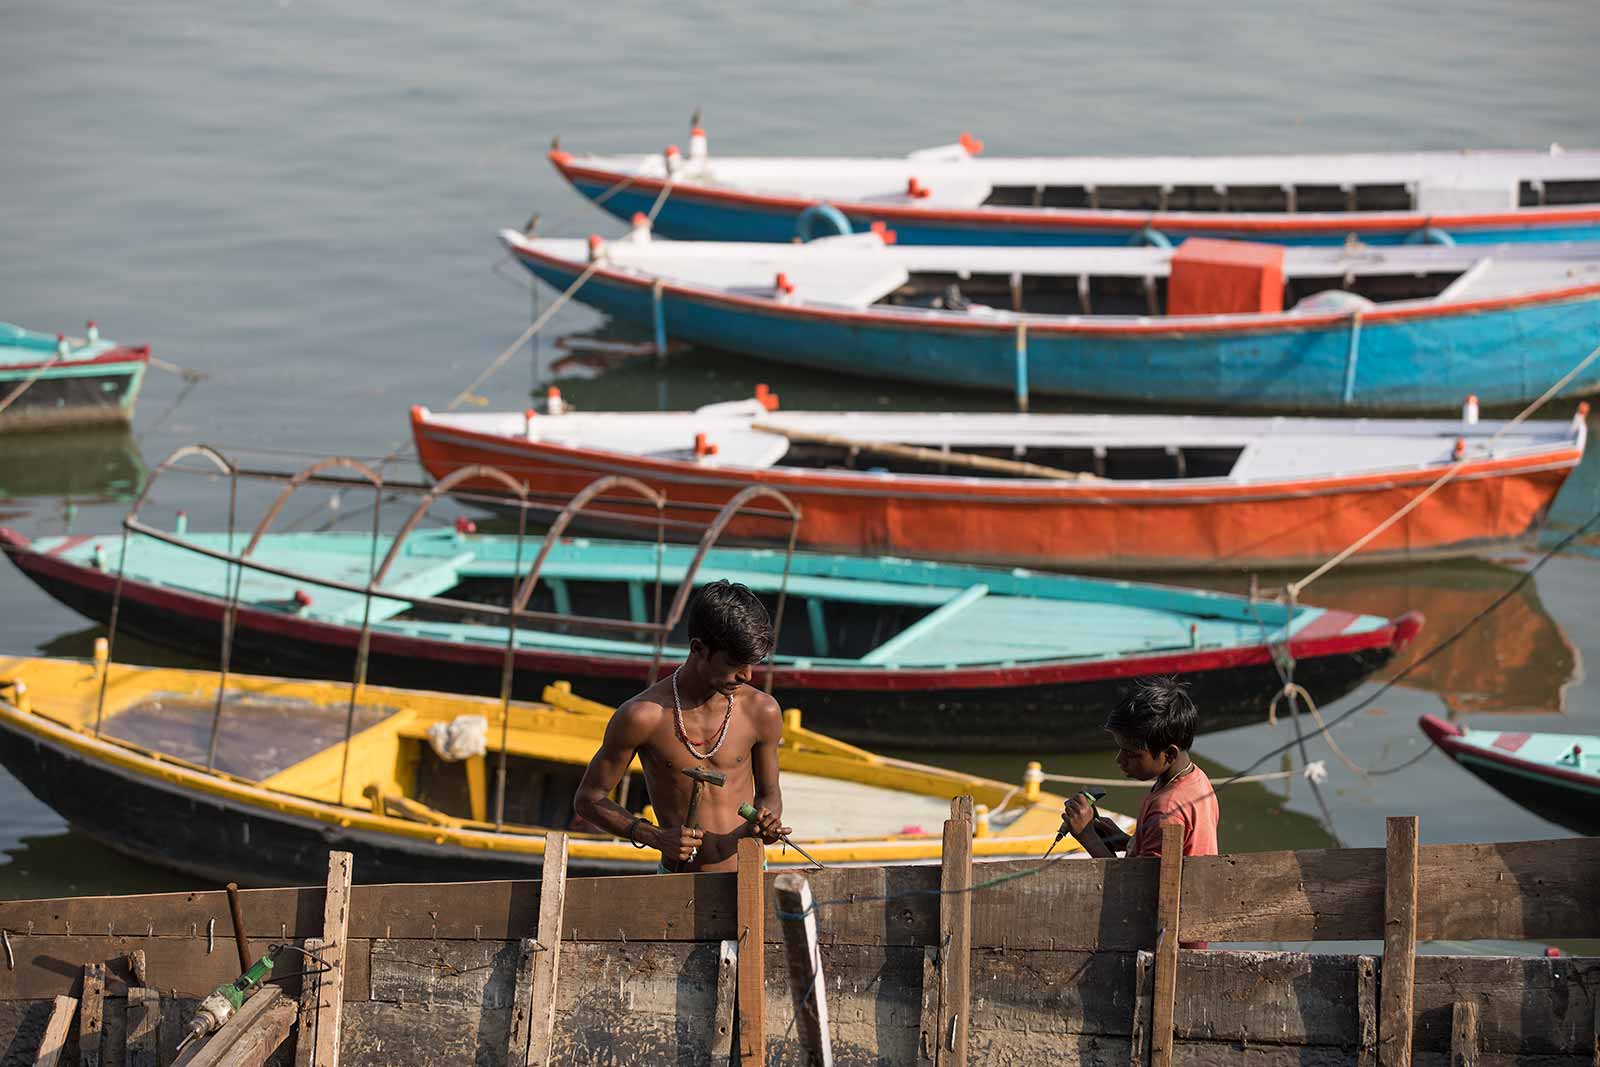 Boats are essential in Varanasi and are a great way of transport to explore the city.